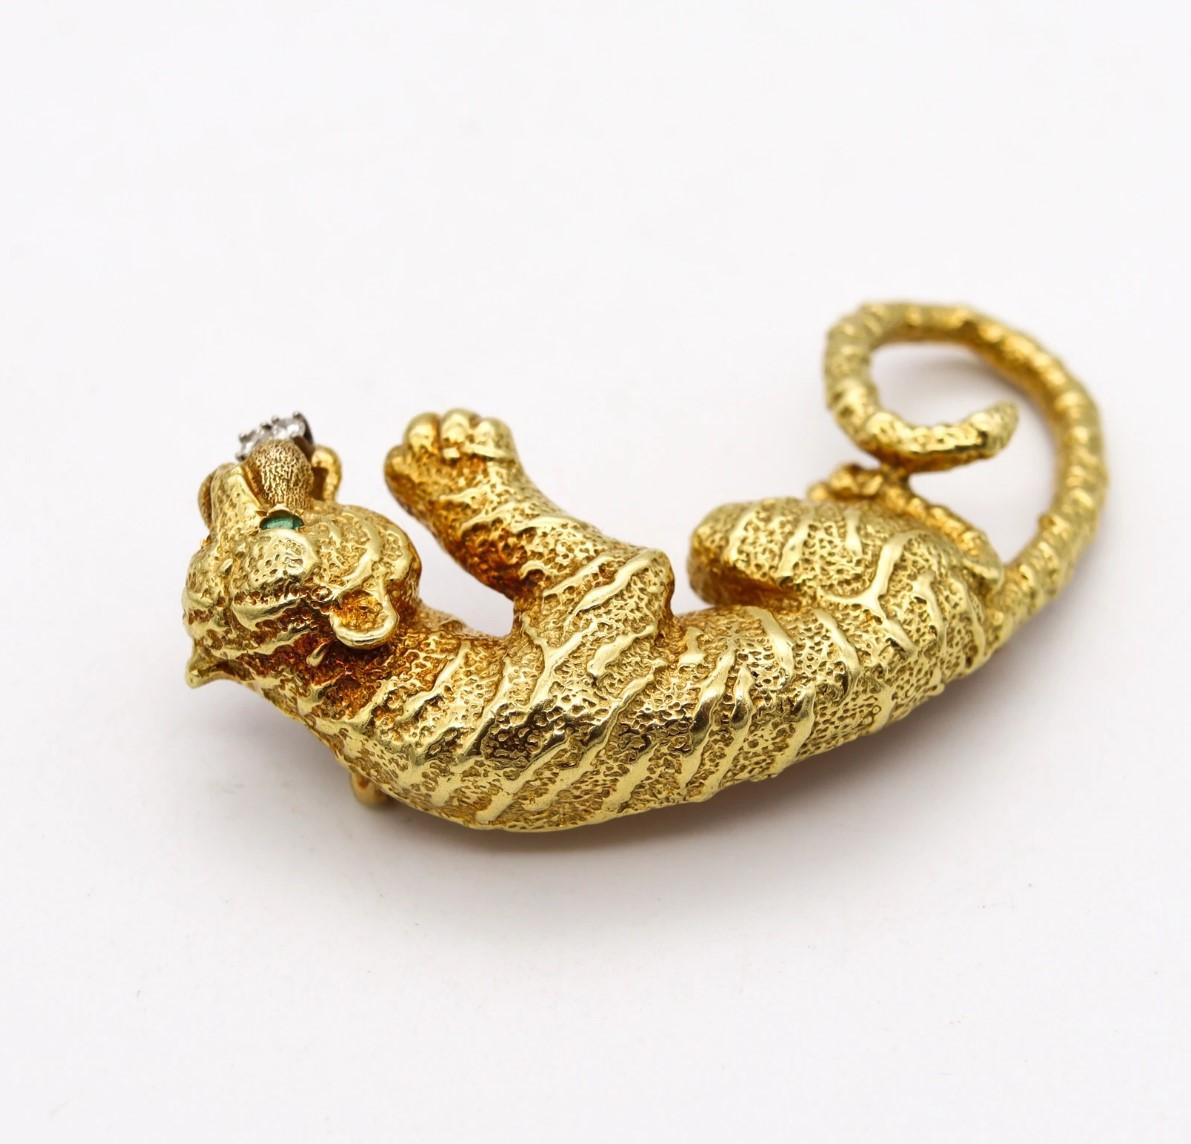 A tiger brooch Designed by Hammerman Brothers.

Stunning piece, created by the American jewelry designers of Hammerman Brothers during the late mid-century period, back in the 1970's. This tiger brooch has been crafted in solid yellow gold of 18